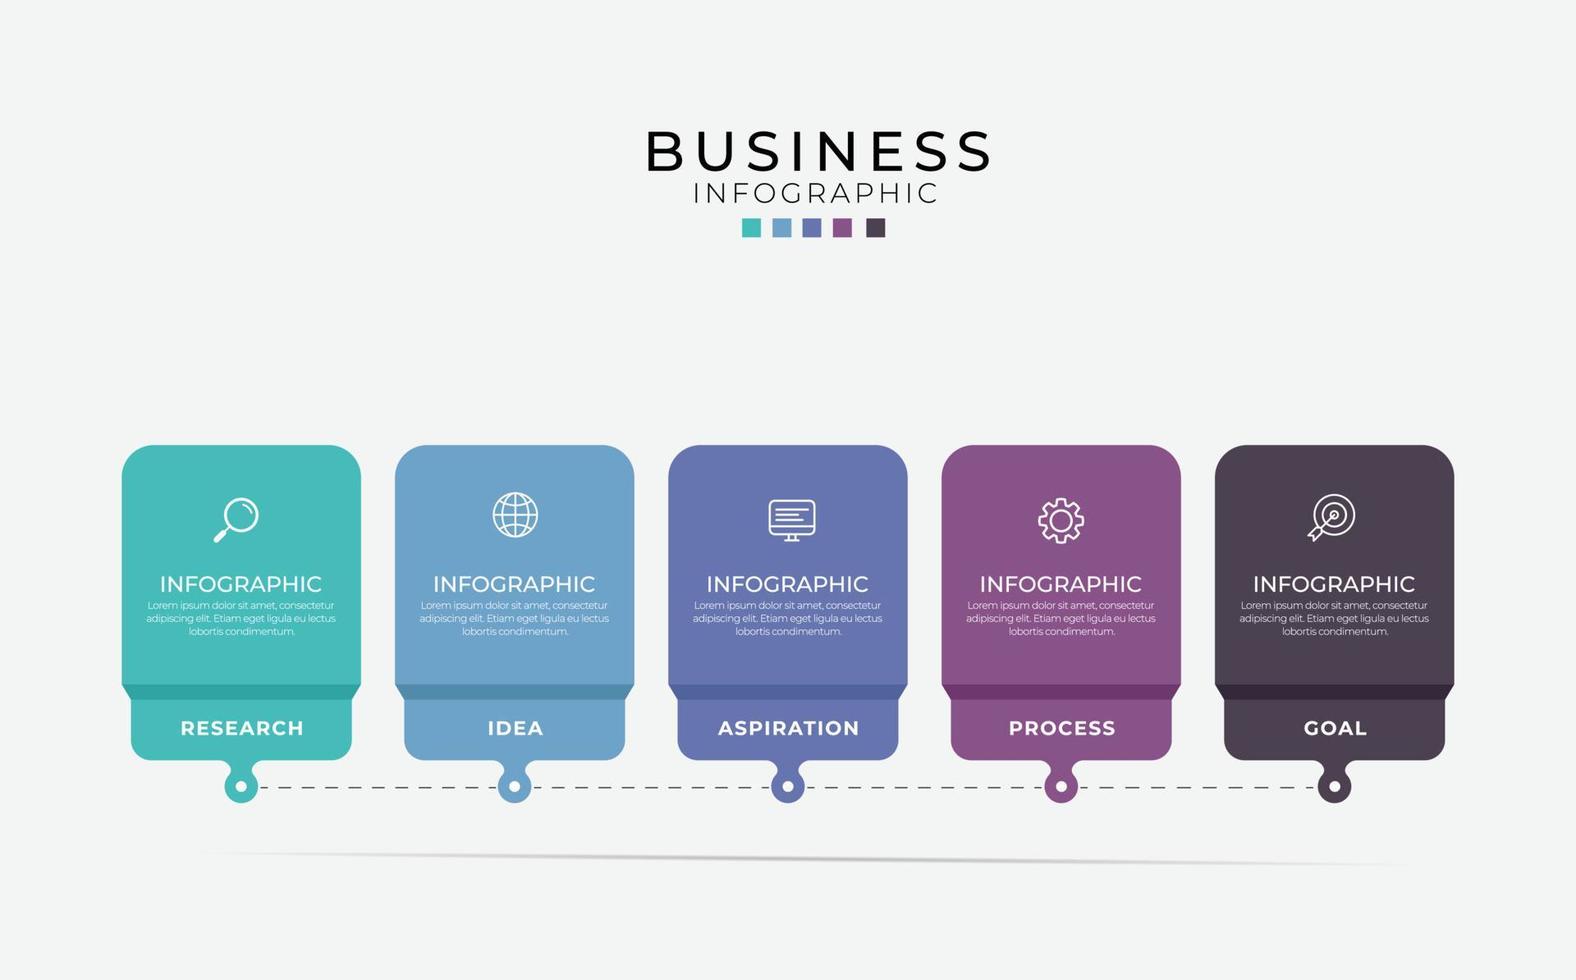 Business infographic element with 6 options, steps, number vector template design